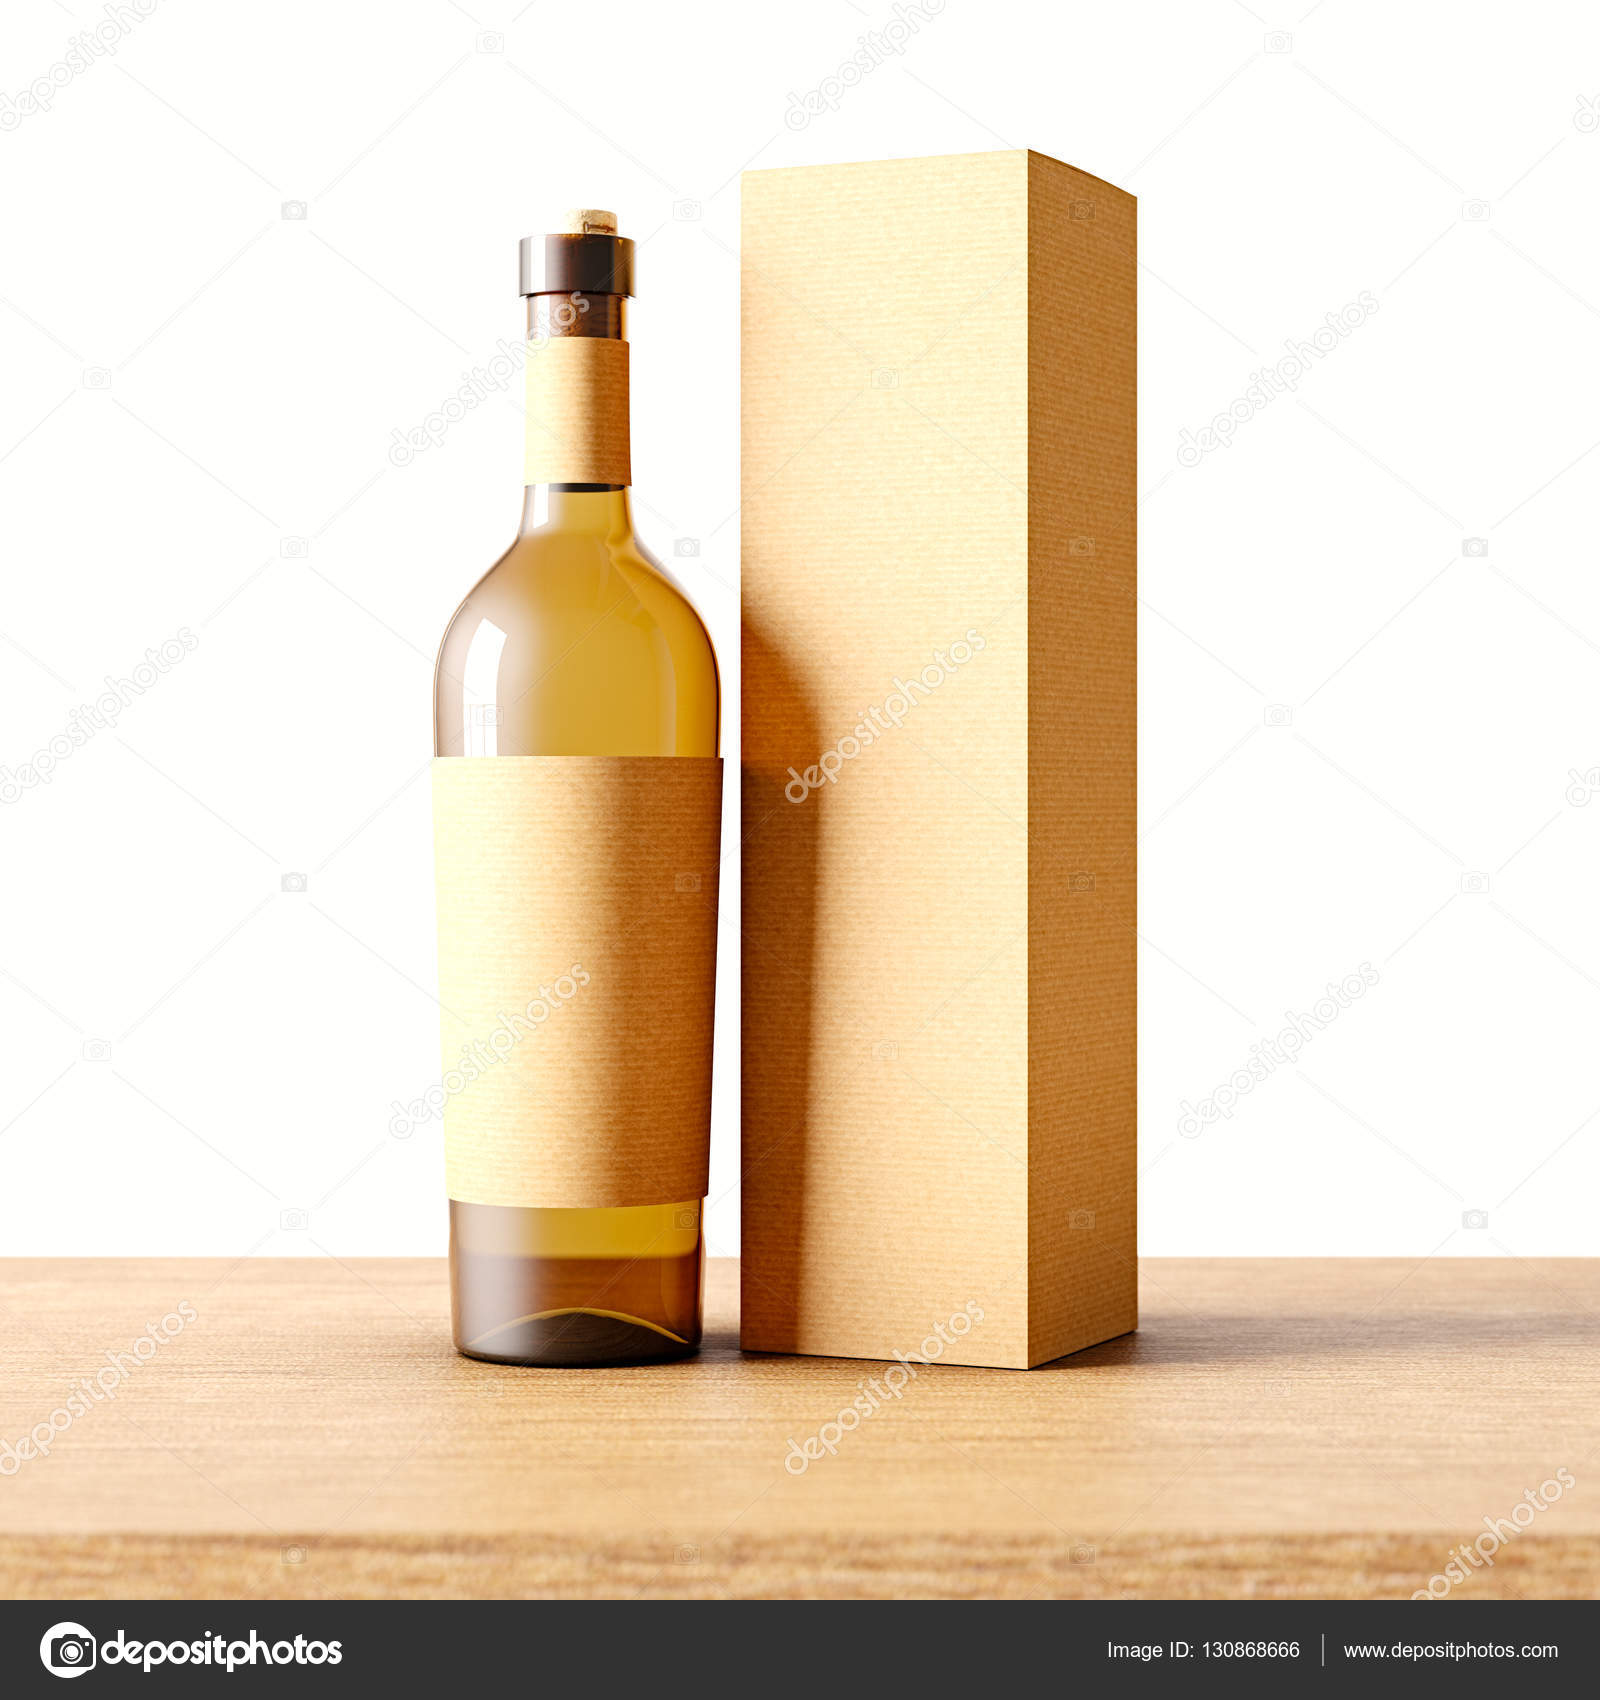 Download Closeup One Transparent Glass Bottle Of Wine On The Wooden Desk White Wall Background Empty Glassy Container Concept With Craft Mockup Label And Carton Paper Bag For Bottles 3d Rendering Stock Photo Image